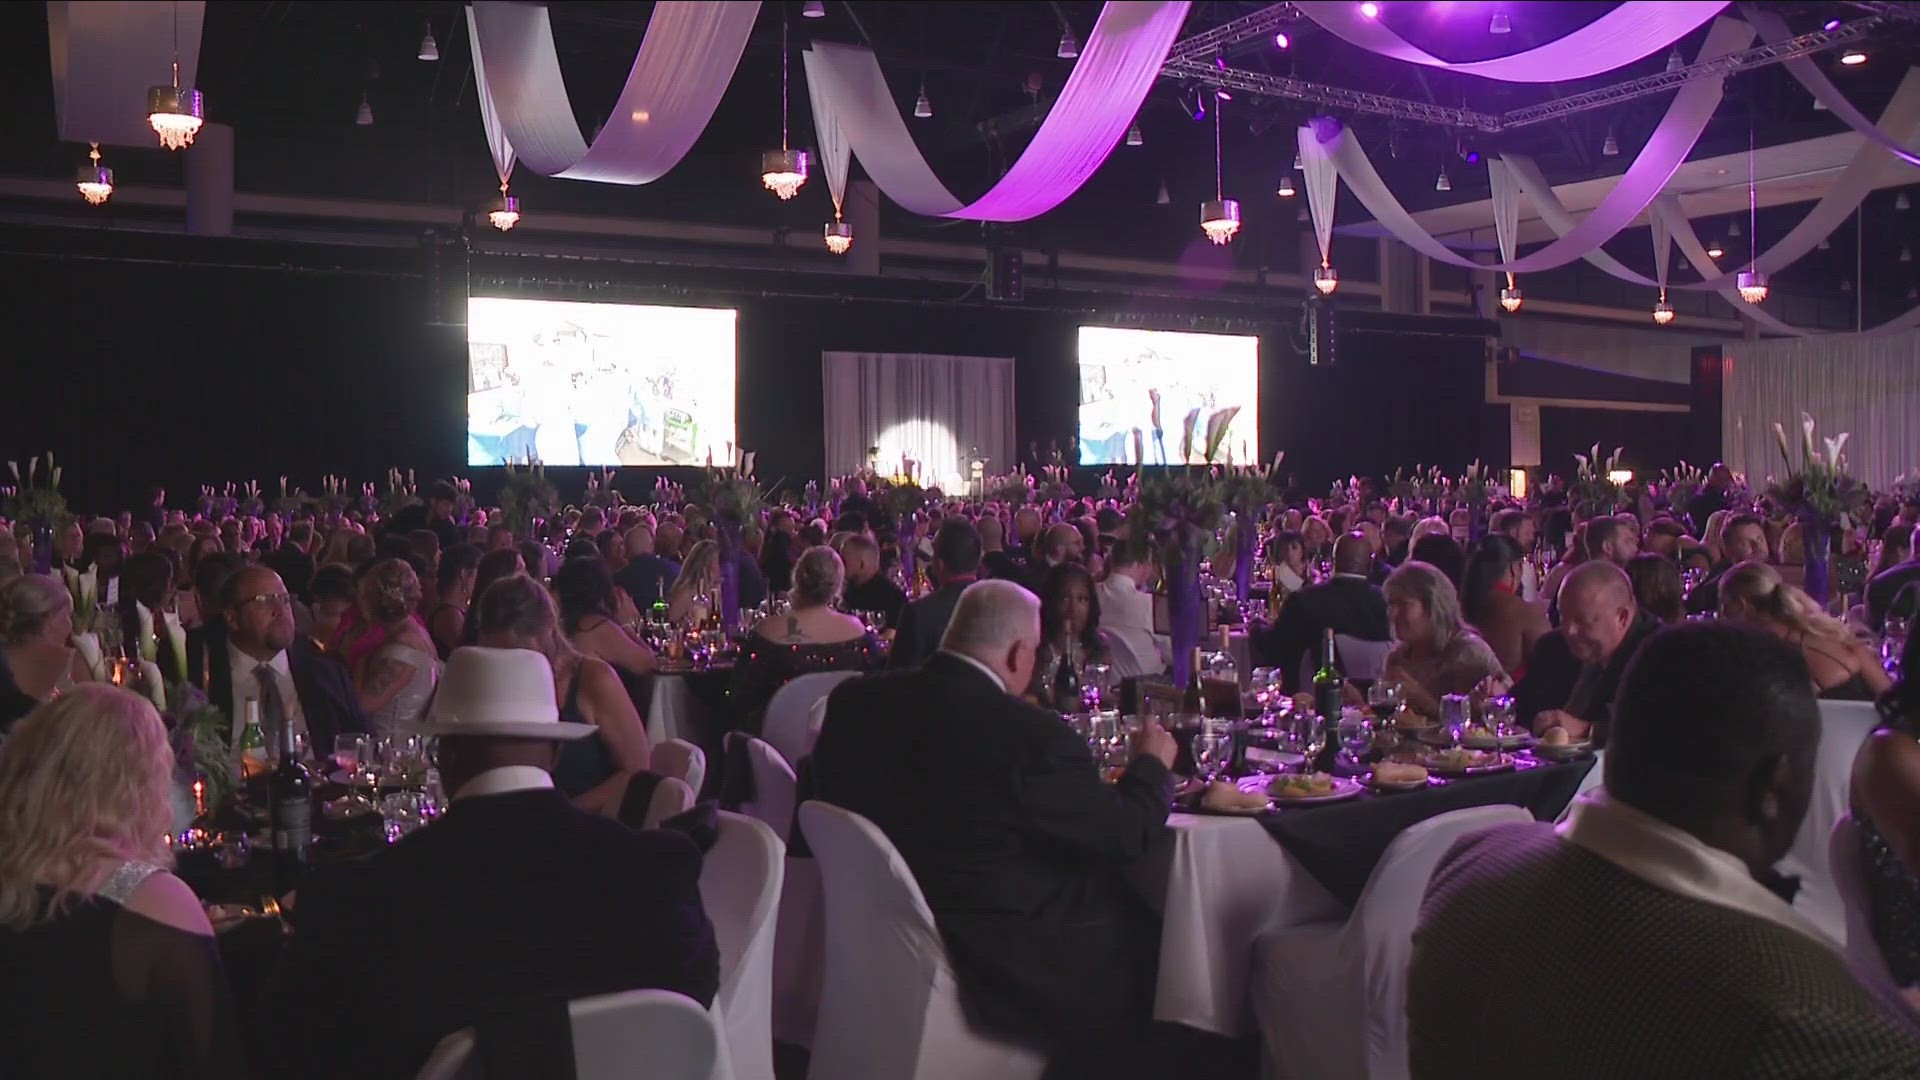 Erie County Medical Center honored its health care professionals on Saturday night at the annual gala.